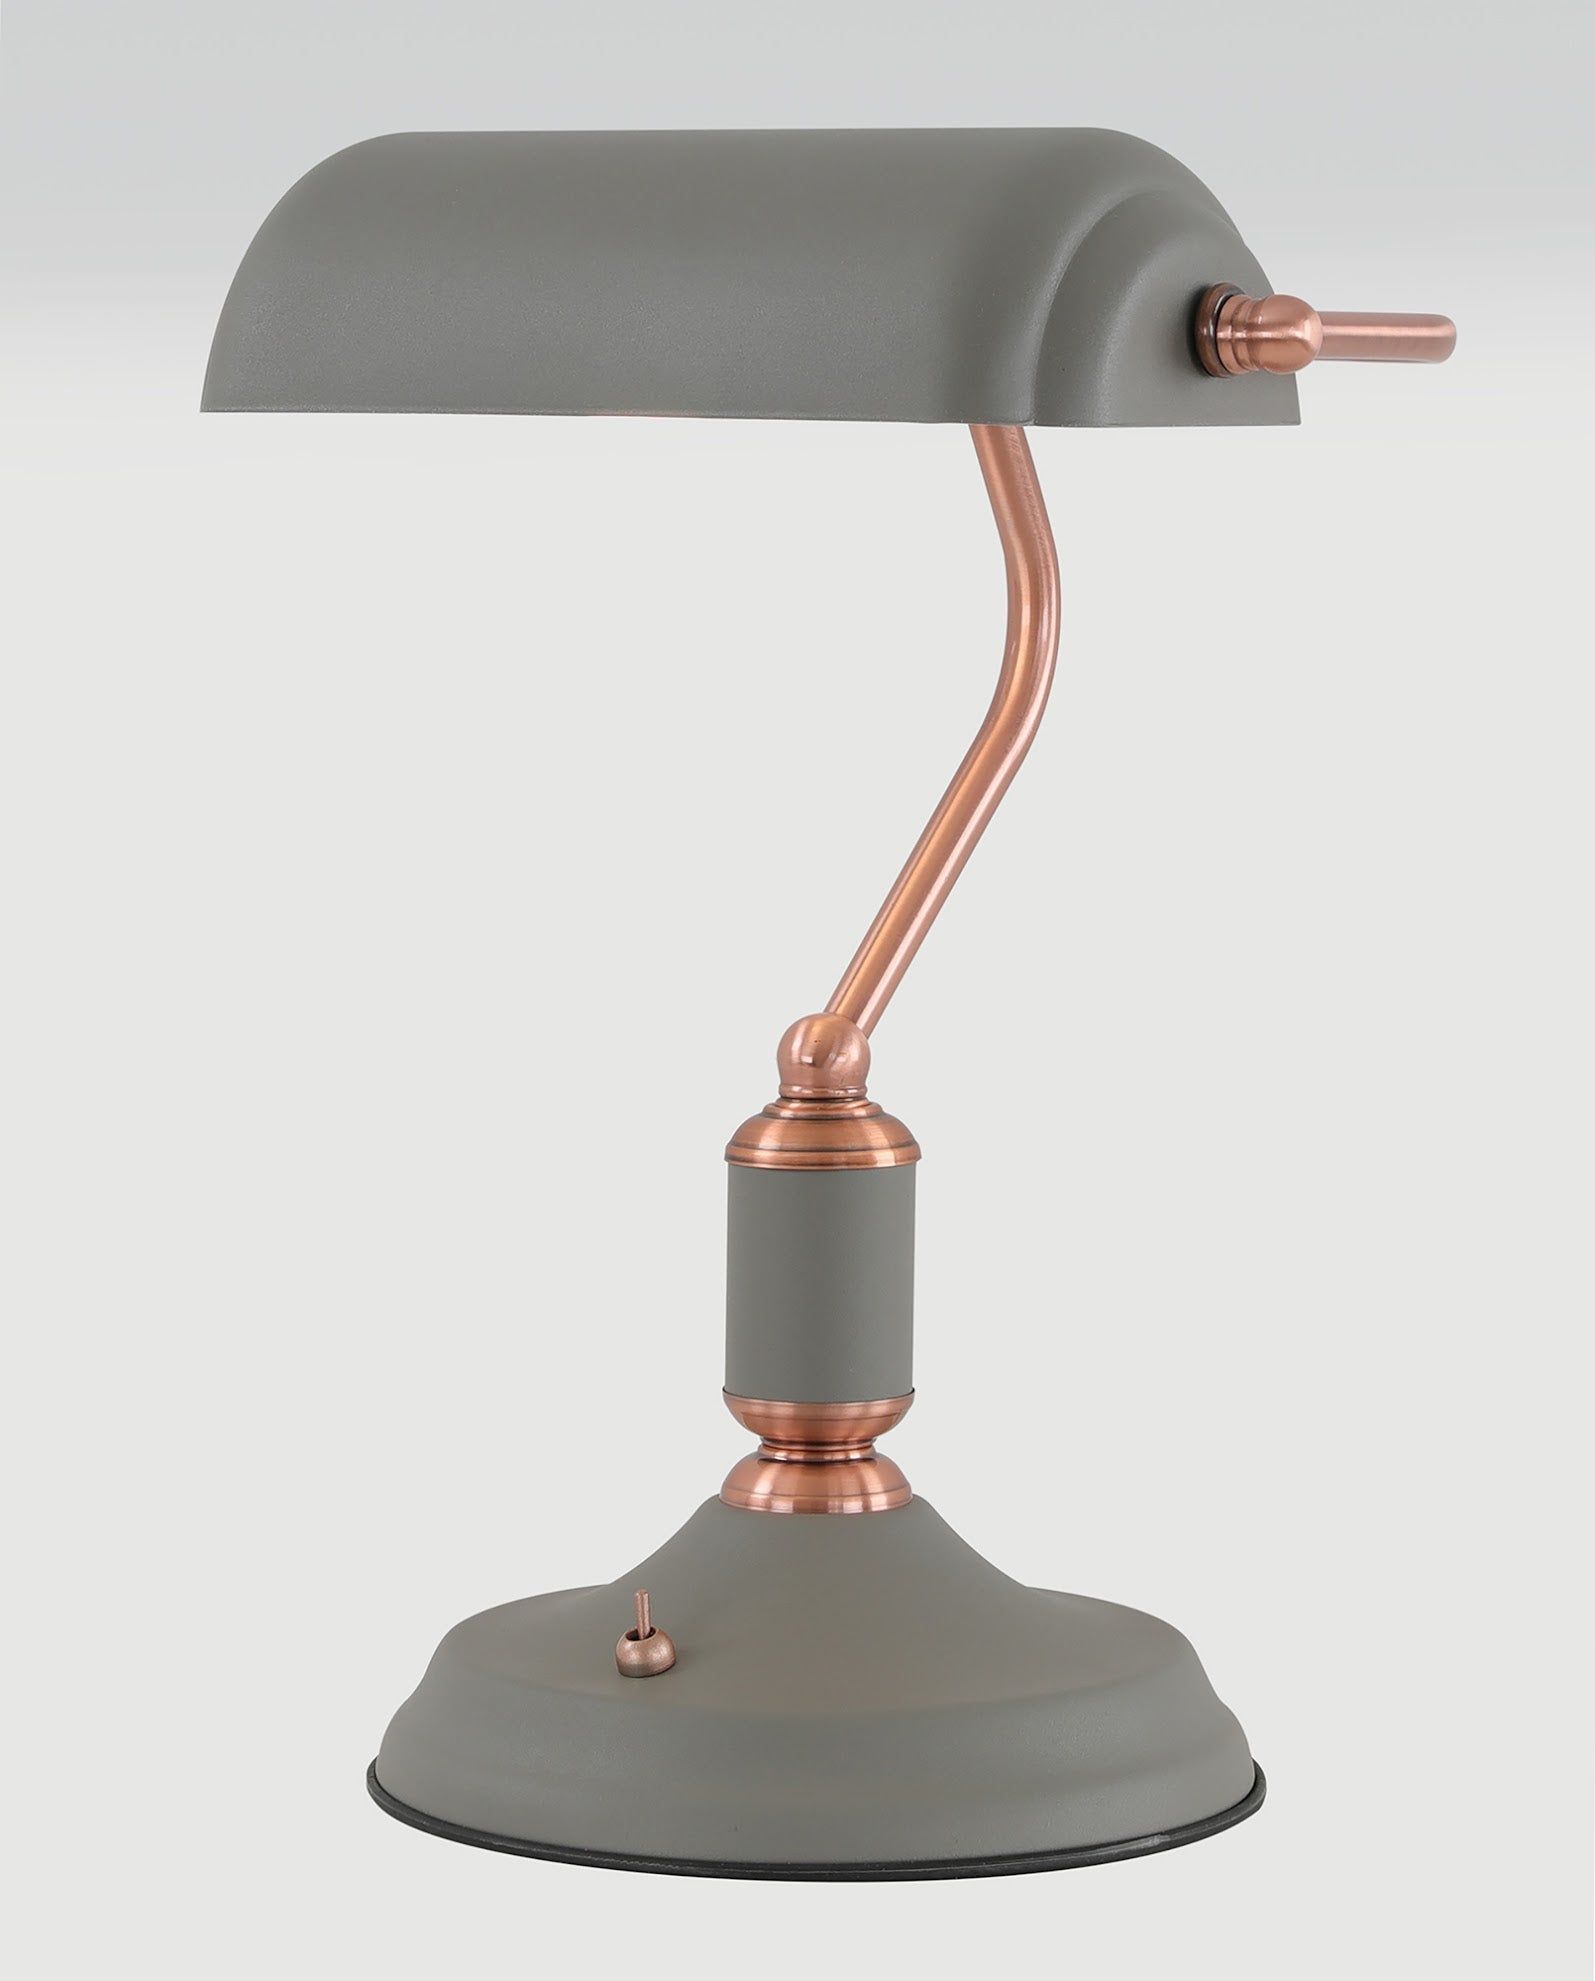 Ietson Table Lamp 1 Light With Toggle Switch, Sand Grey/Copper